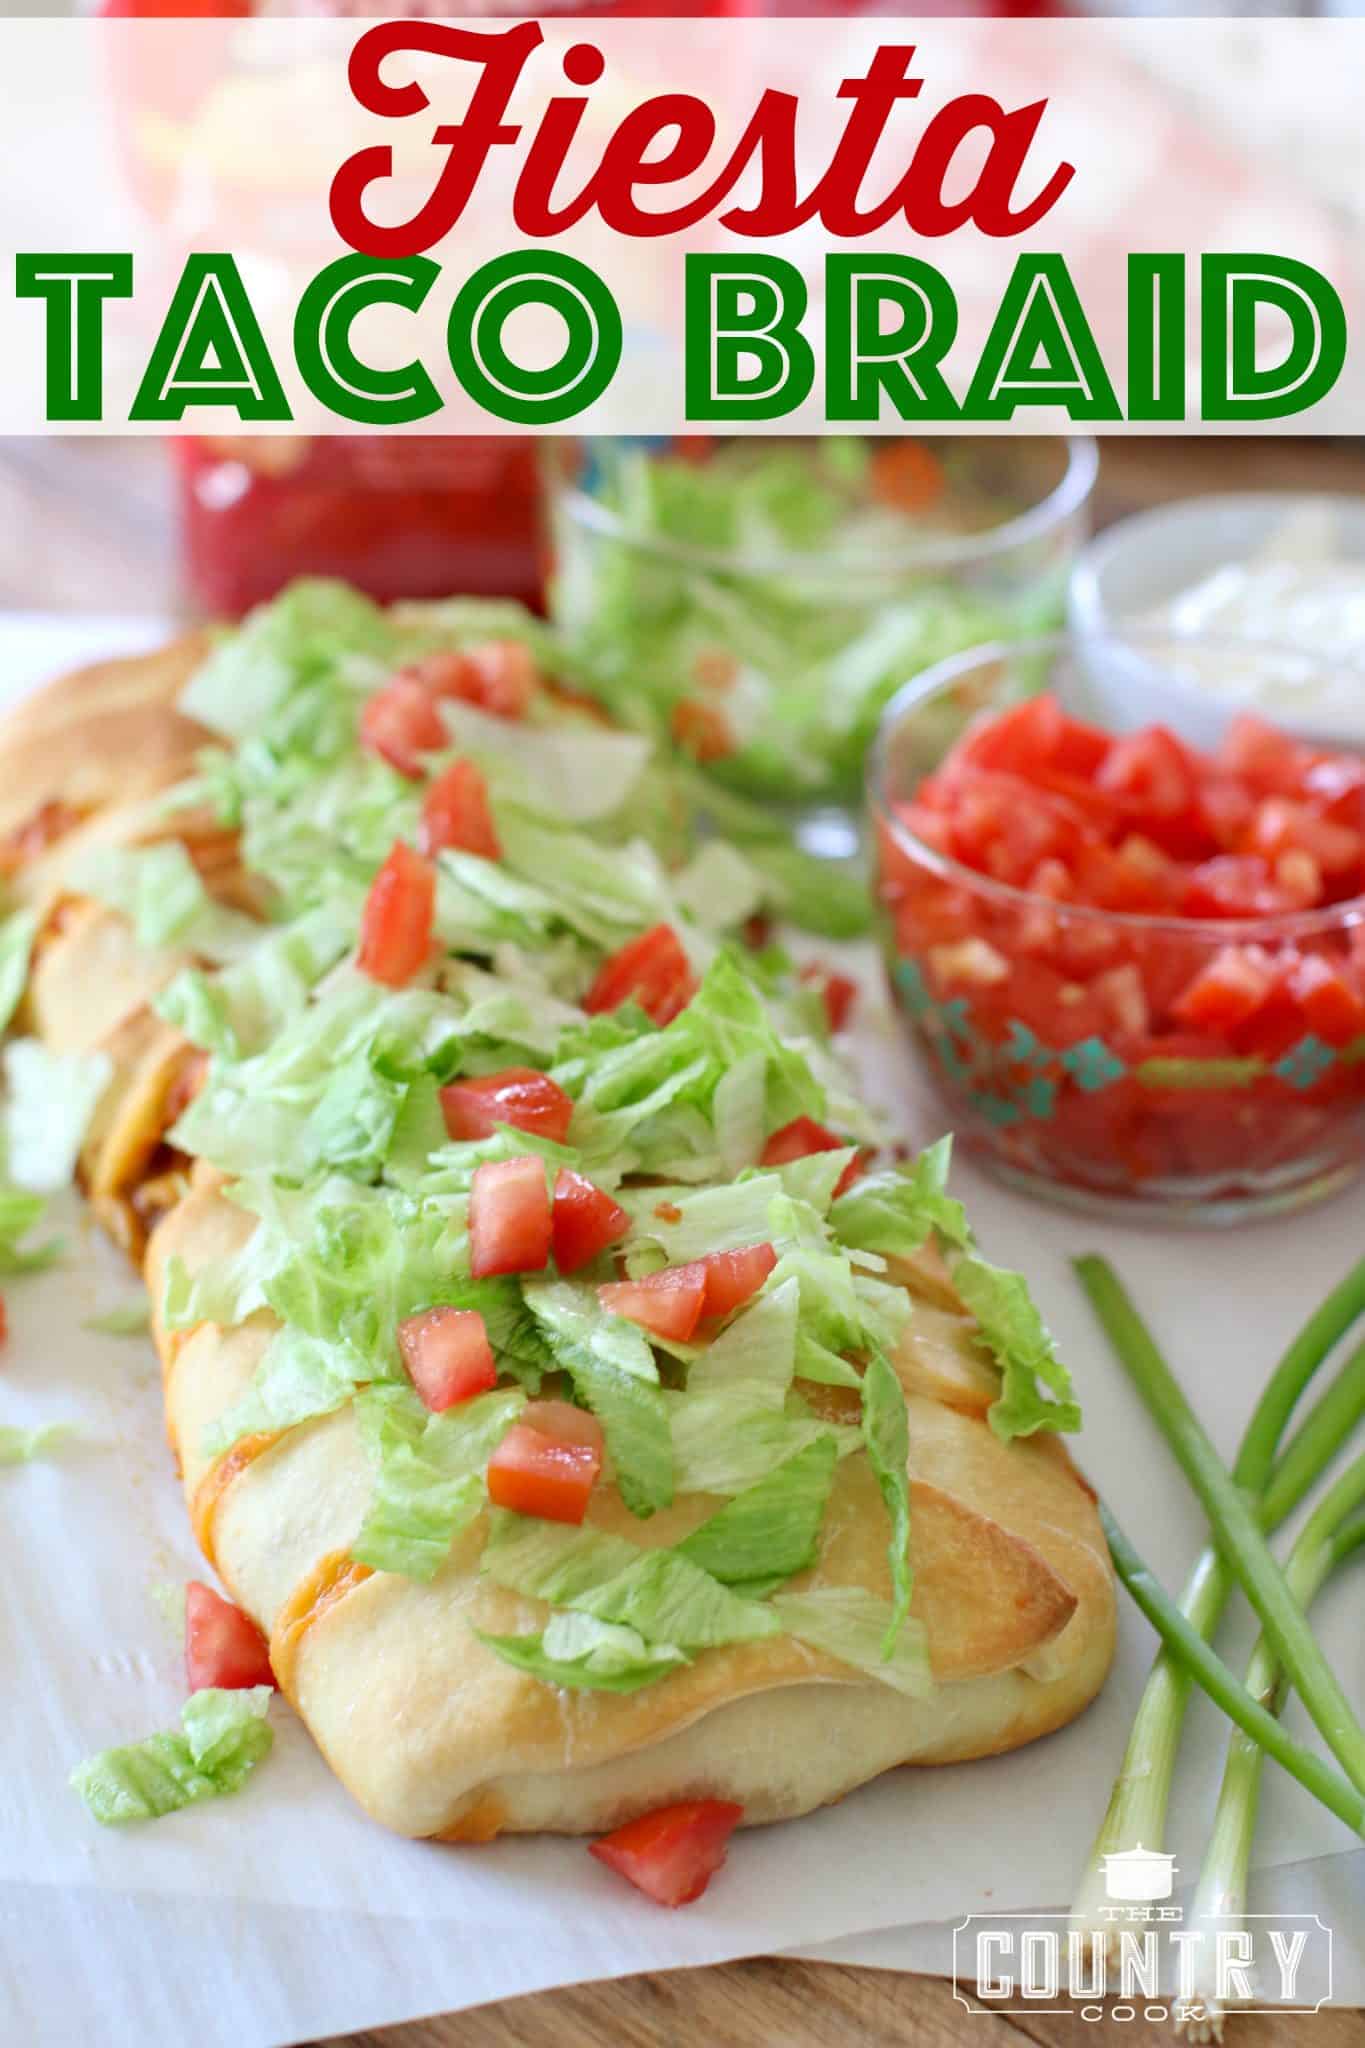 Fiesta Taco Braid recipe from The Country Cook.